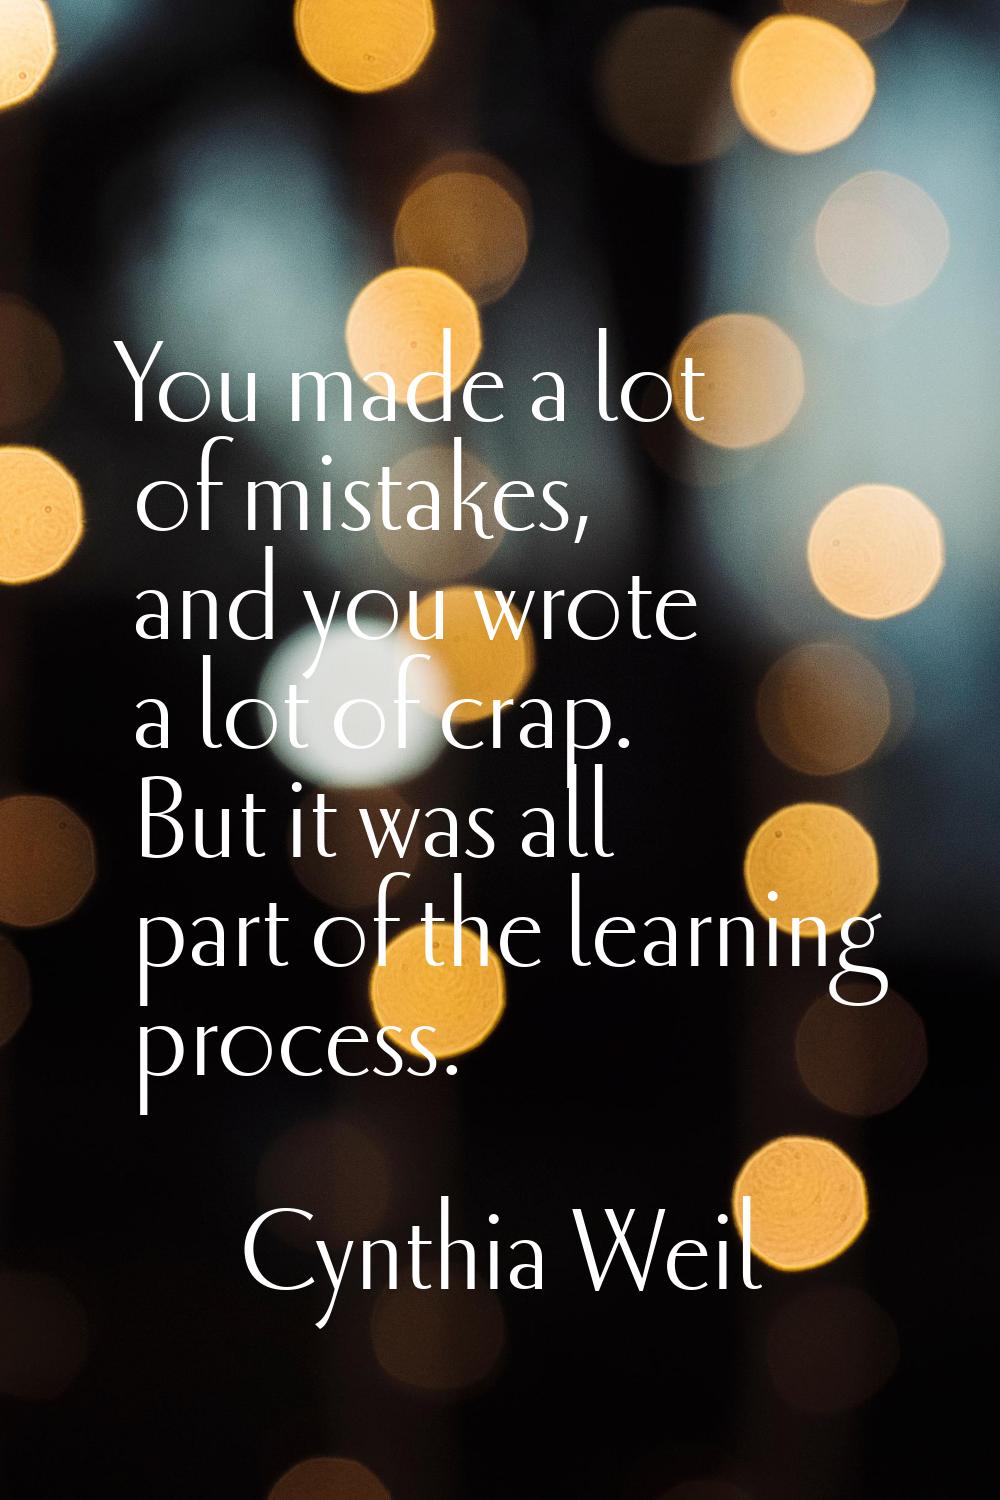 You made a lot of mistakes, and you wrote a lot of crap. But it was all part of the learning proces